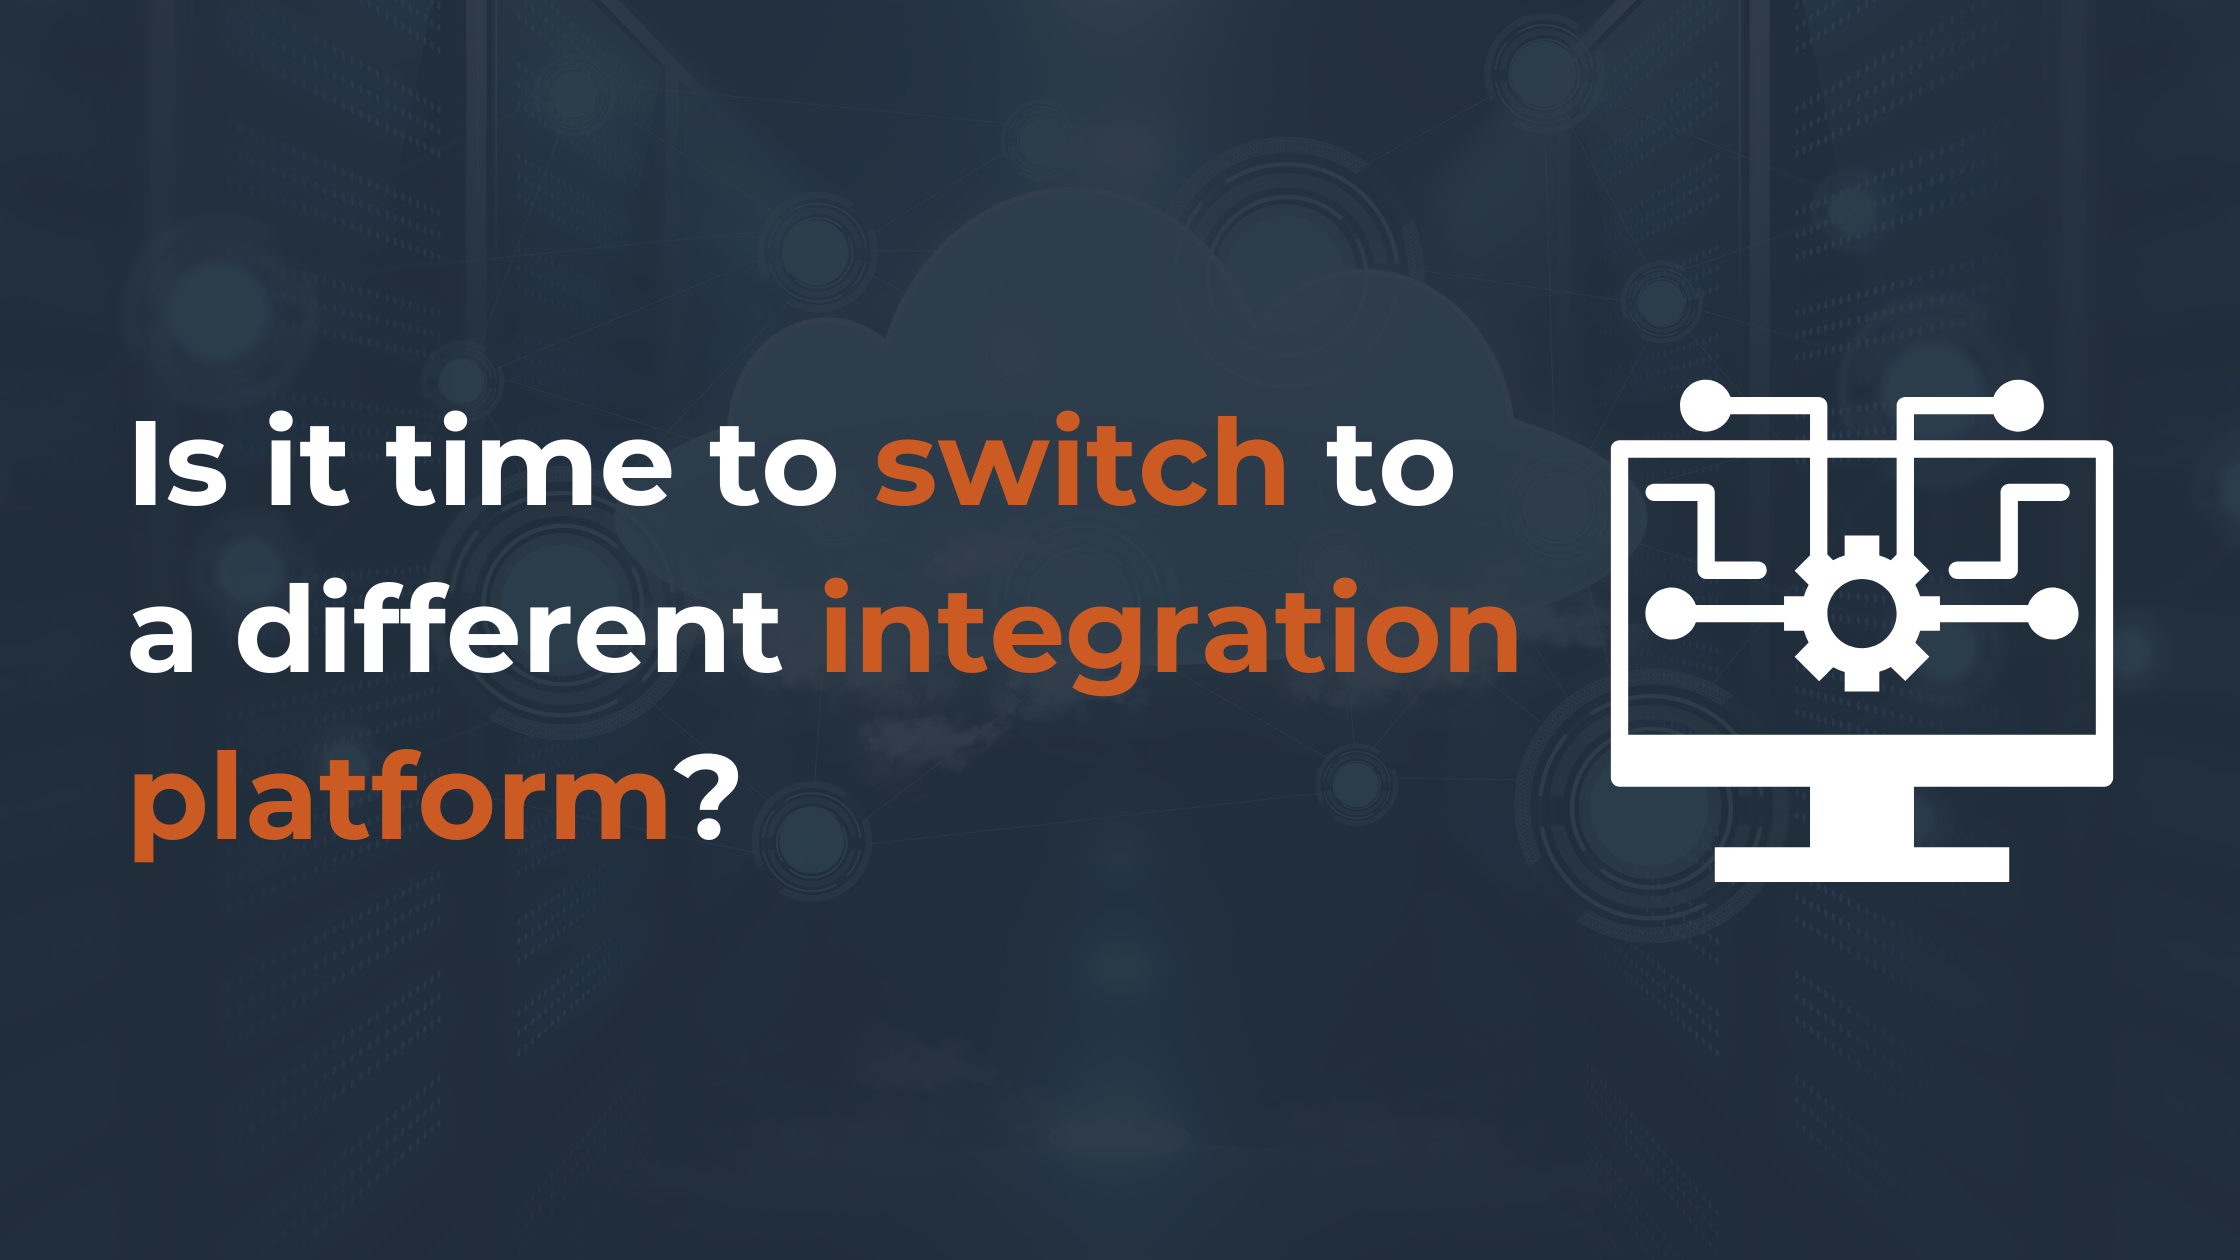 Is it time to switch to a different integration platform?